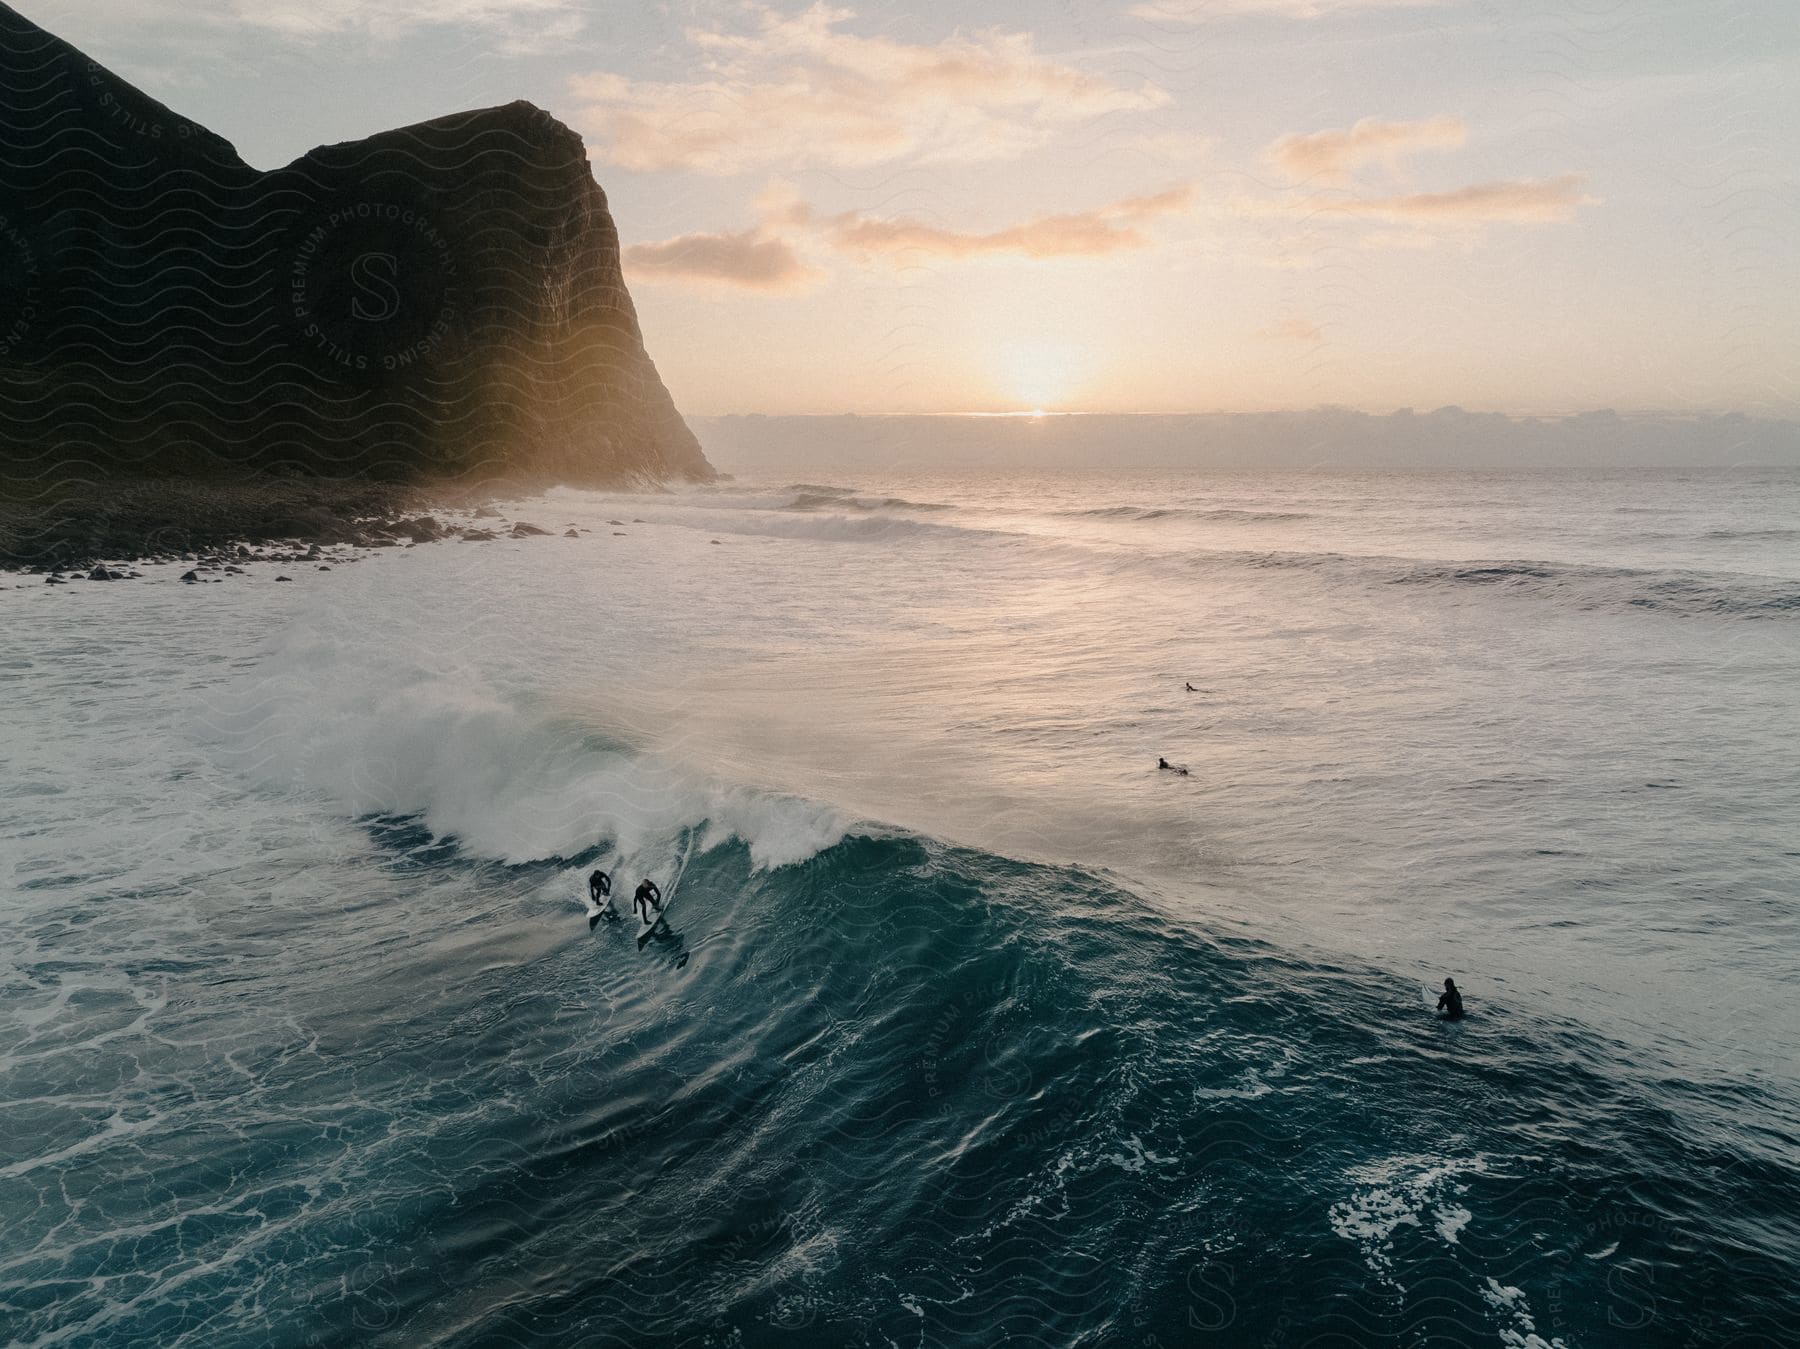 Stock photo of surfers riding a wave near a promontory as the sun shines on the horizon